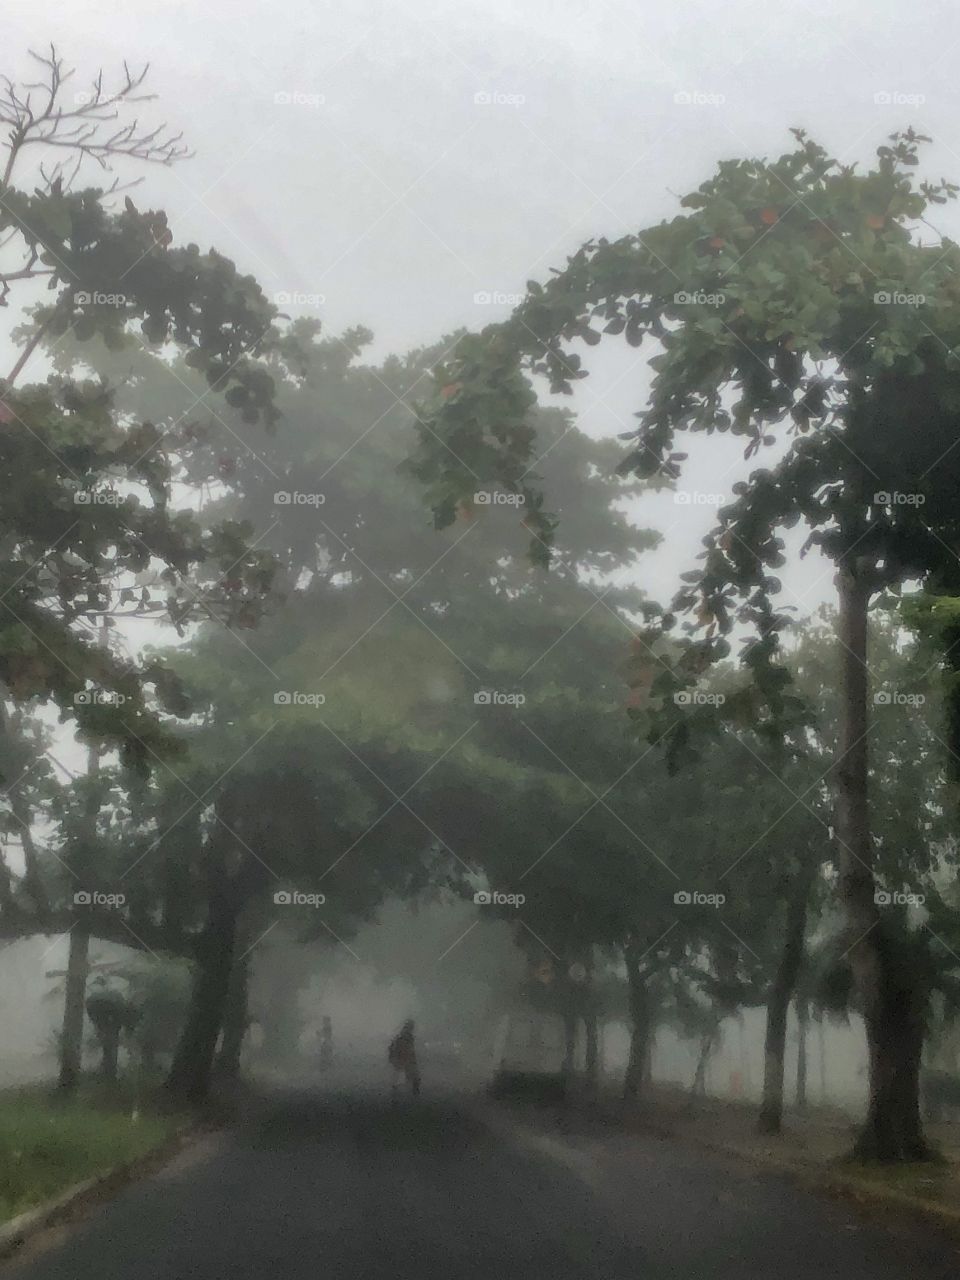 Blurred view from window with trees and a person ,on a rainy day